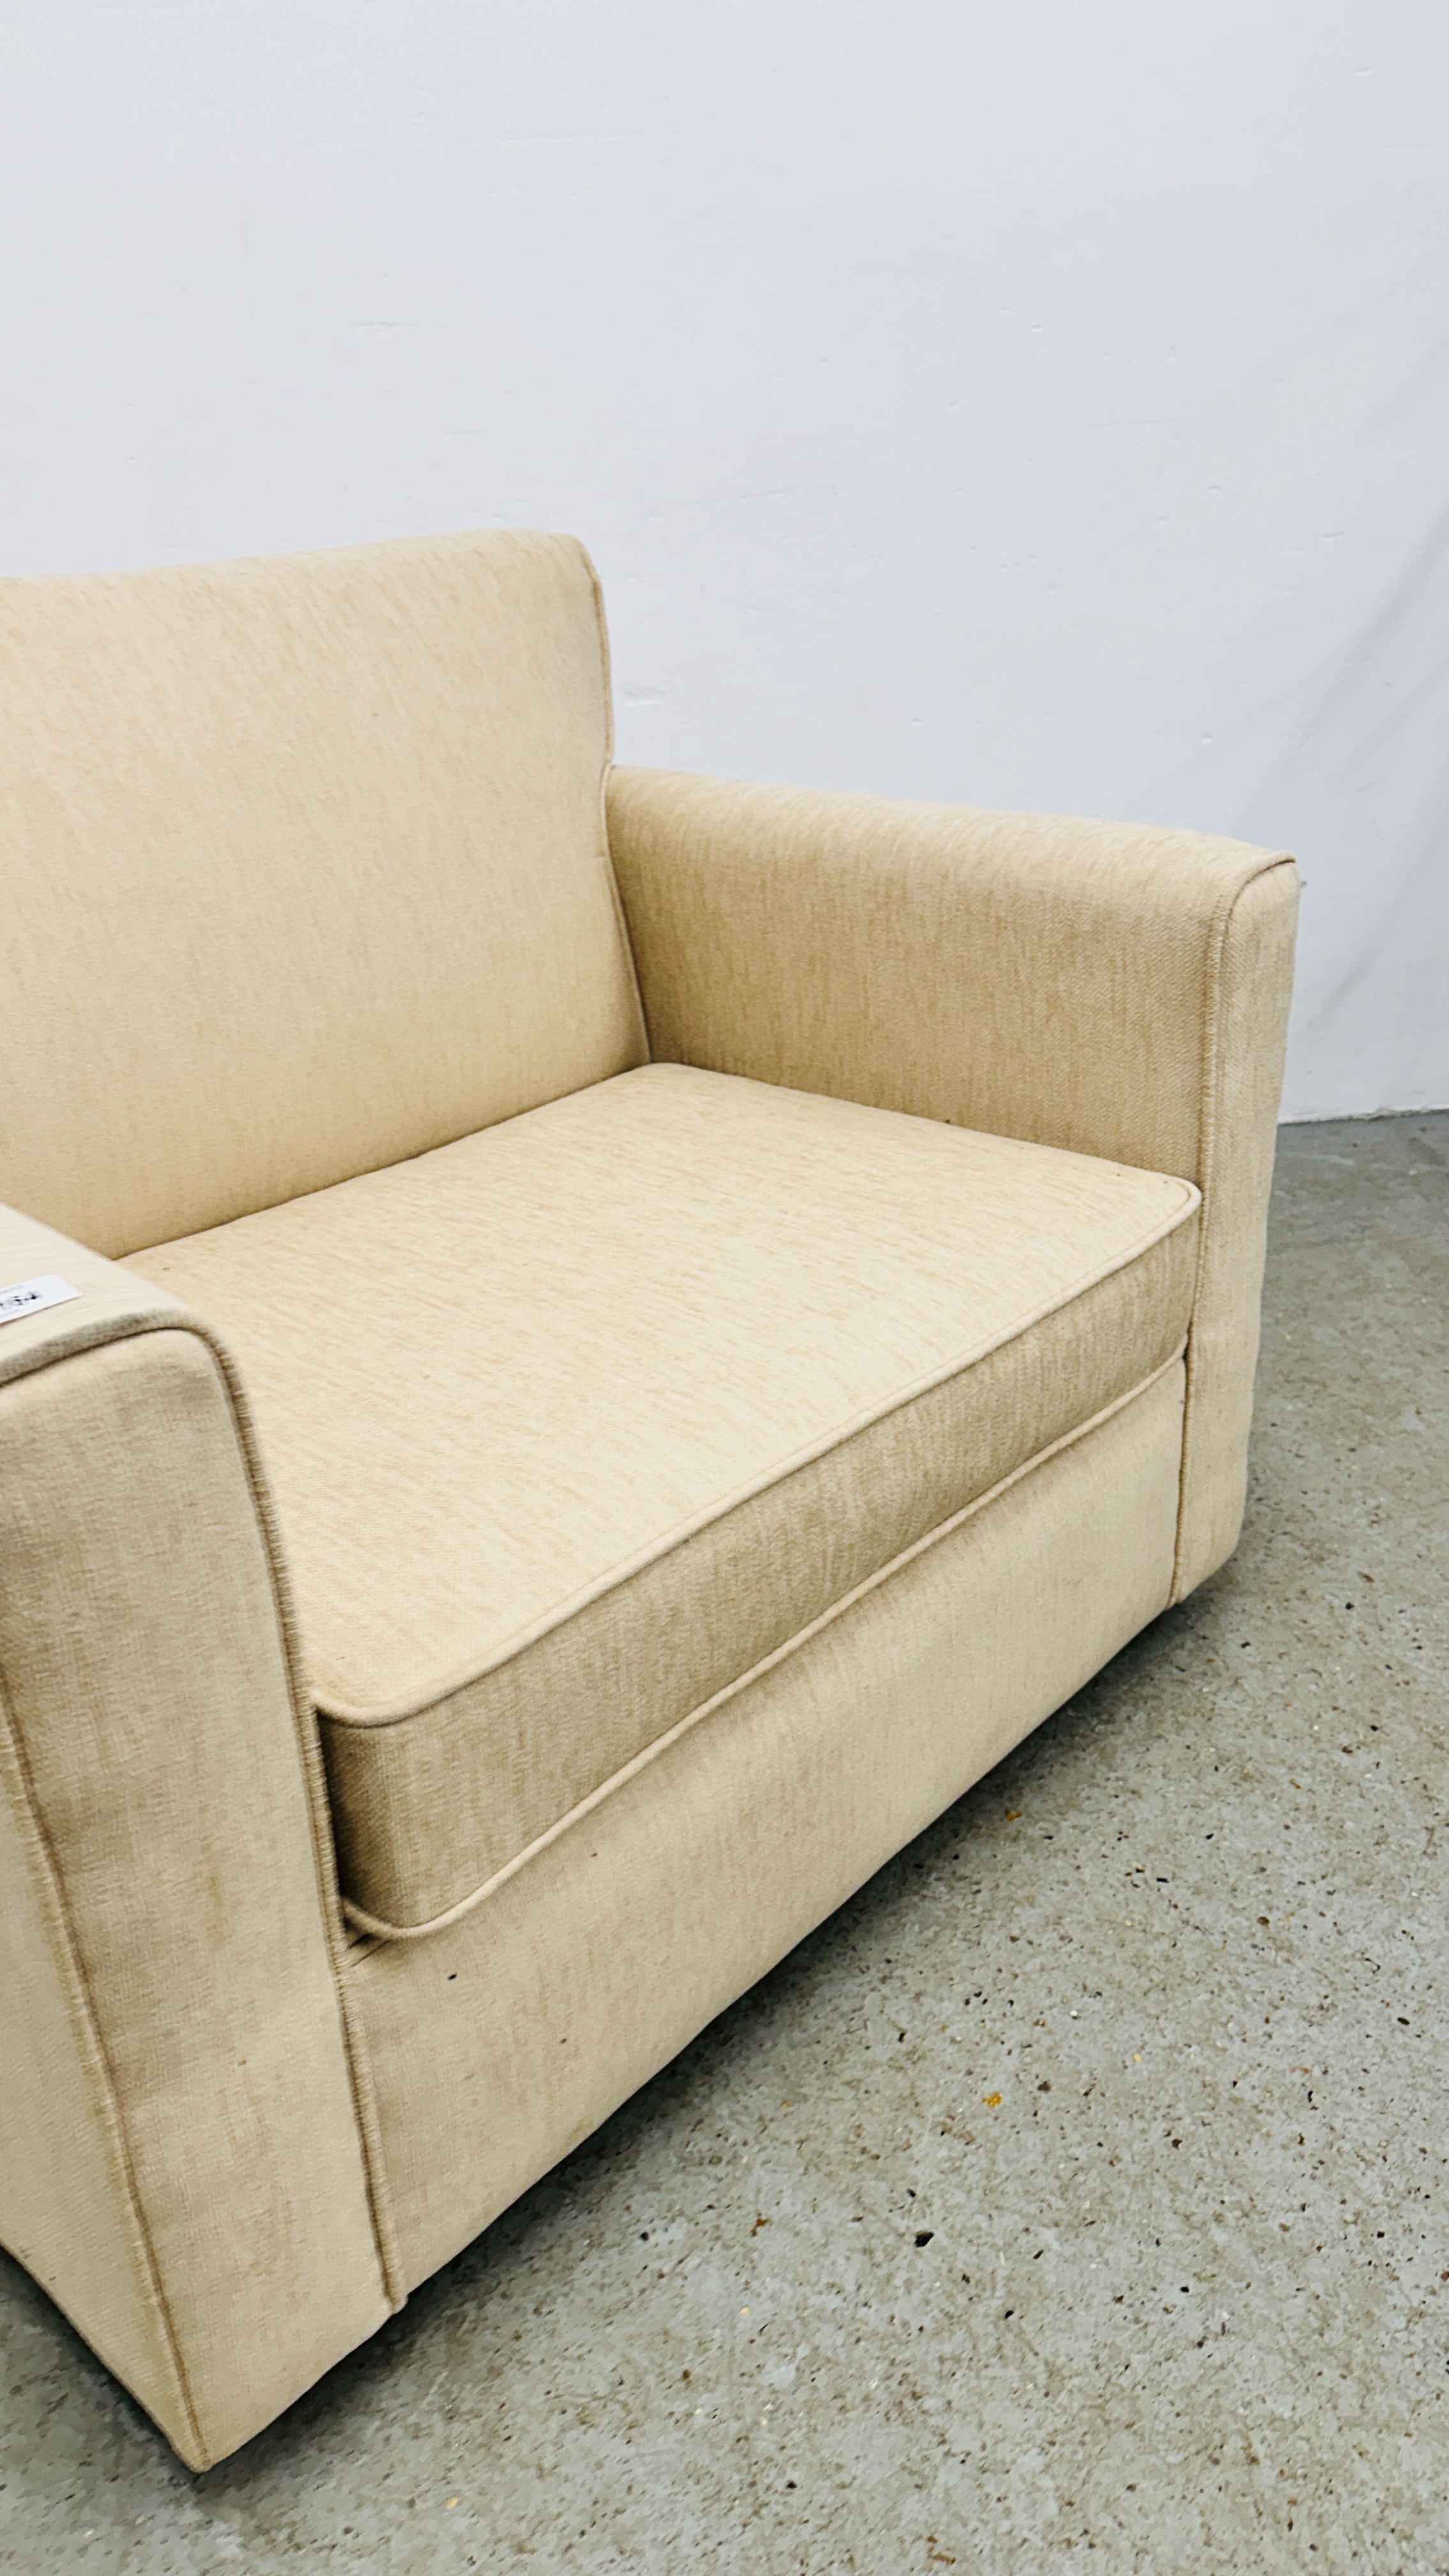 CREAM UPHOLSTERED ARM CHAIR / SOFA BED. - Image 4 of 12